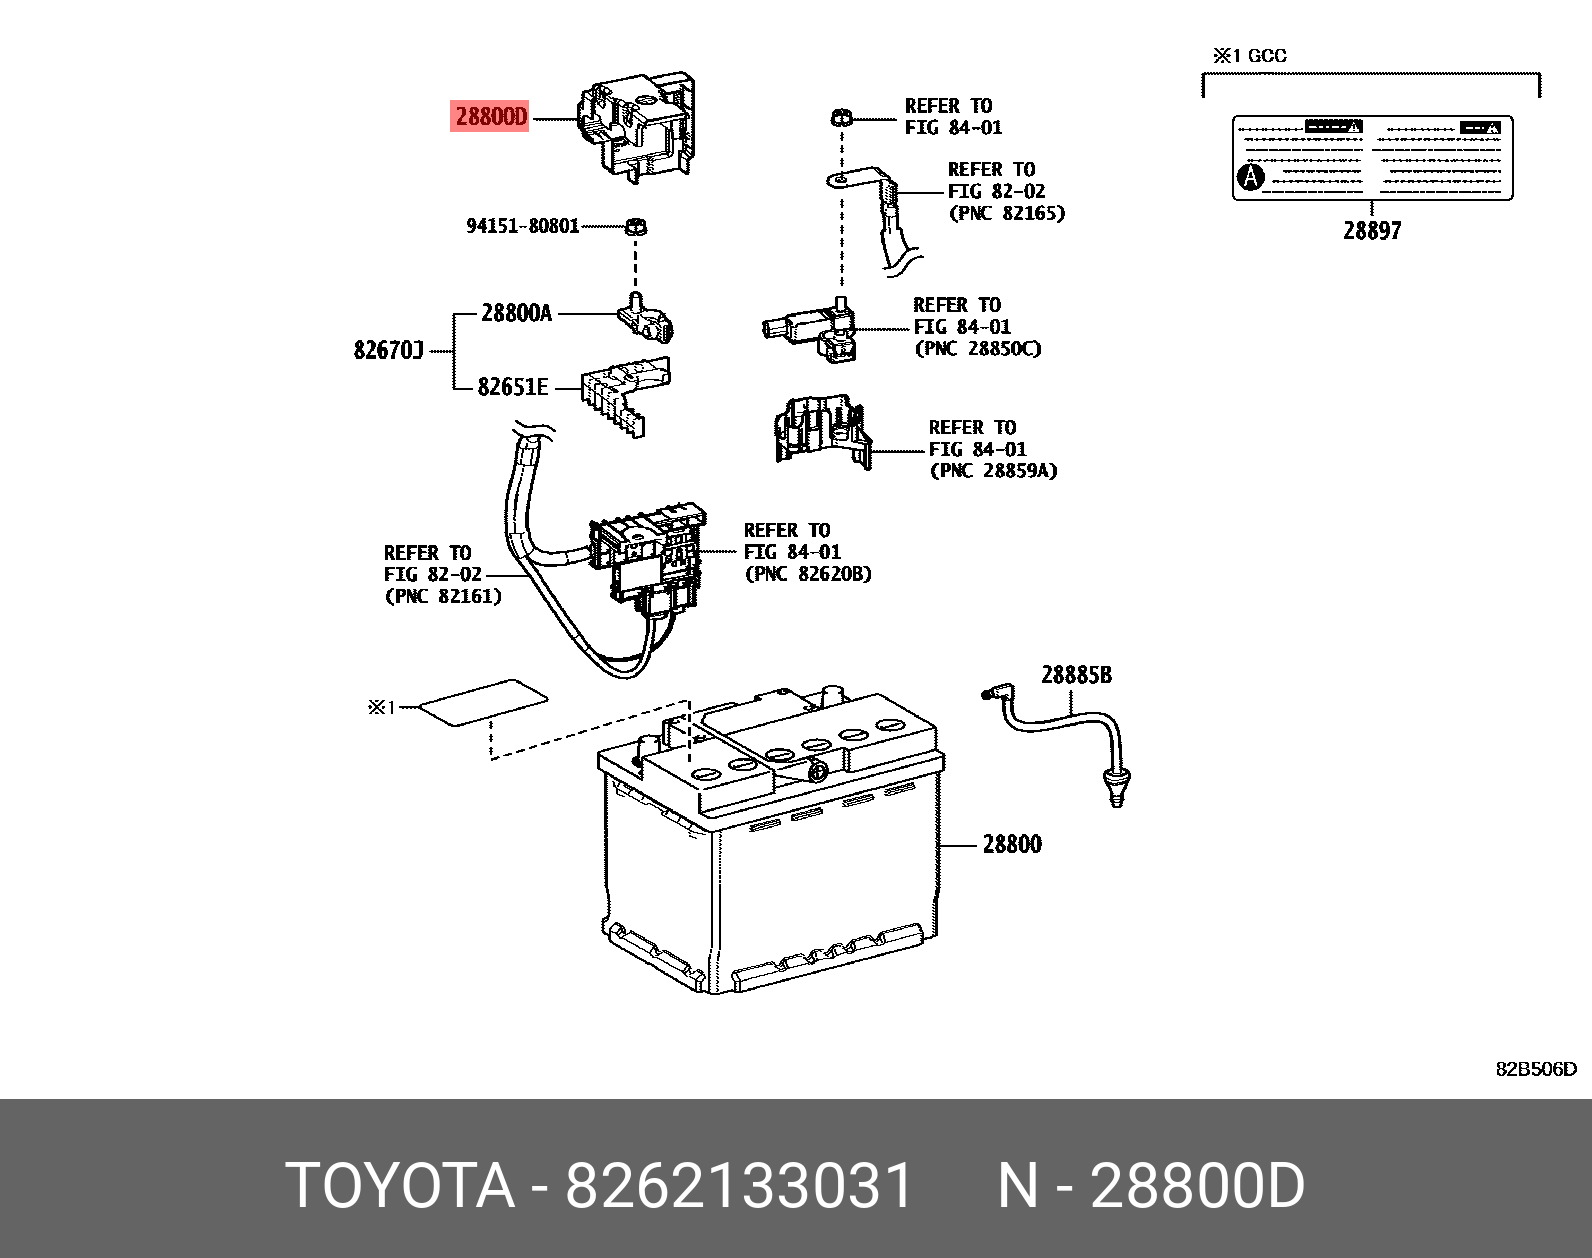 CAMRY 201706-, COVER, CONNECTOR(FOR BATTERY TERMINAL)